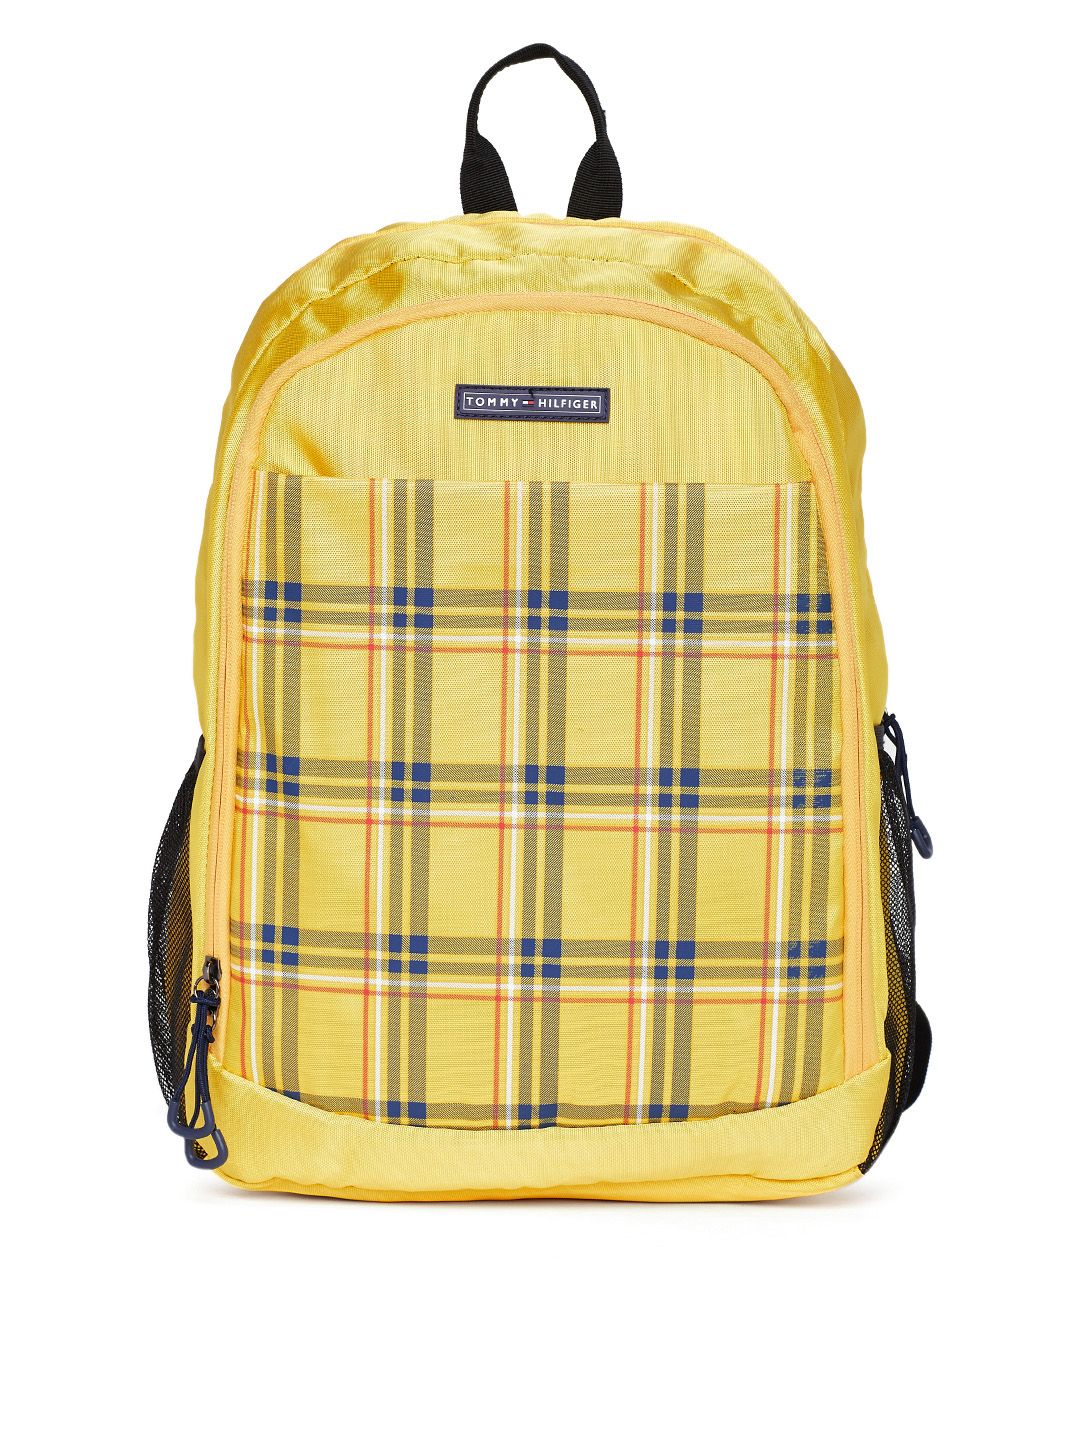 Tommy Hilfiger Unisex Yellow Geometric Print Laptop Backpack Price in India